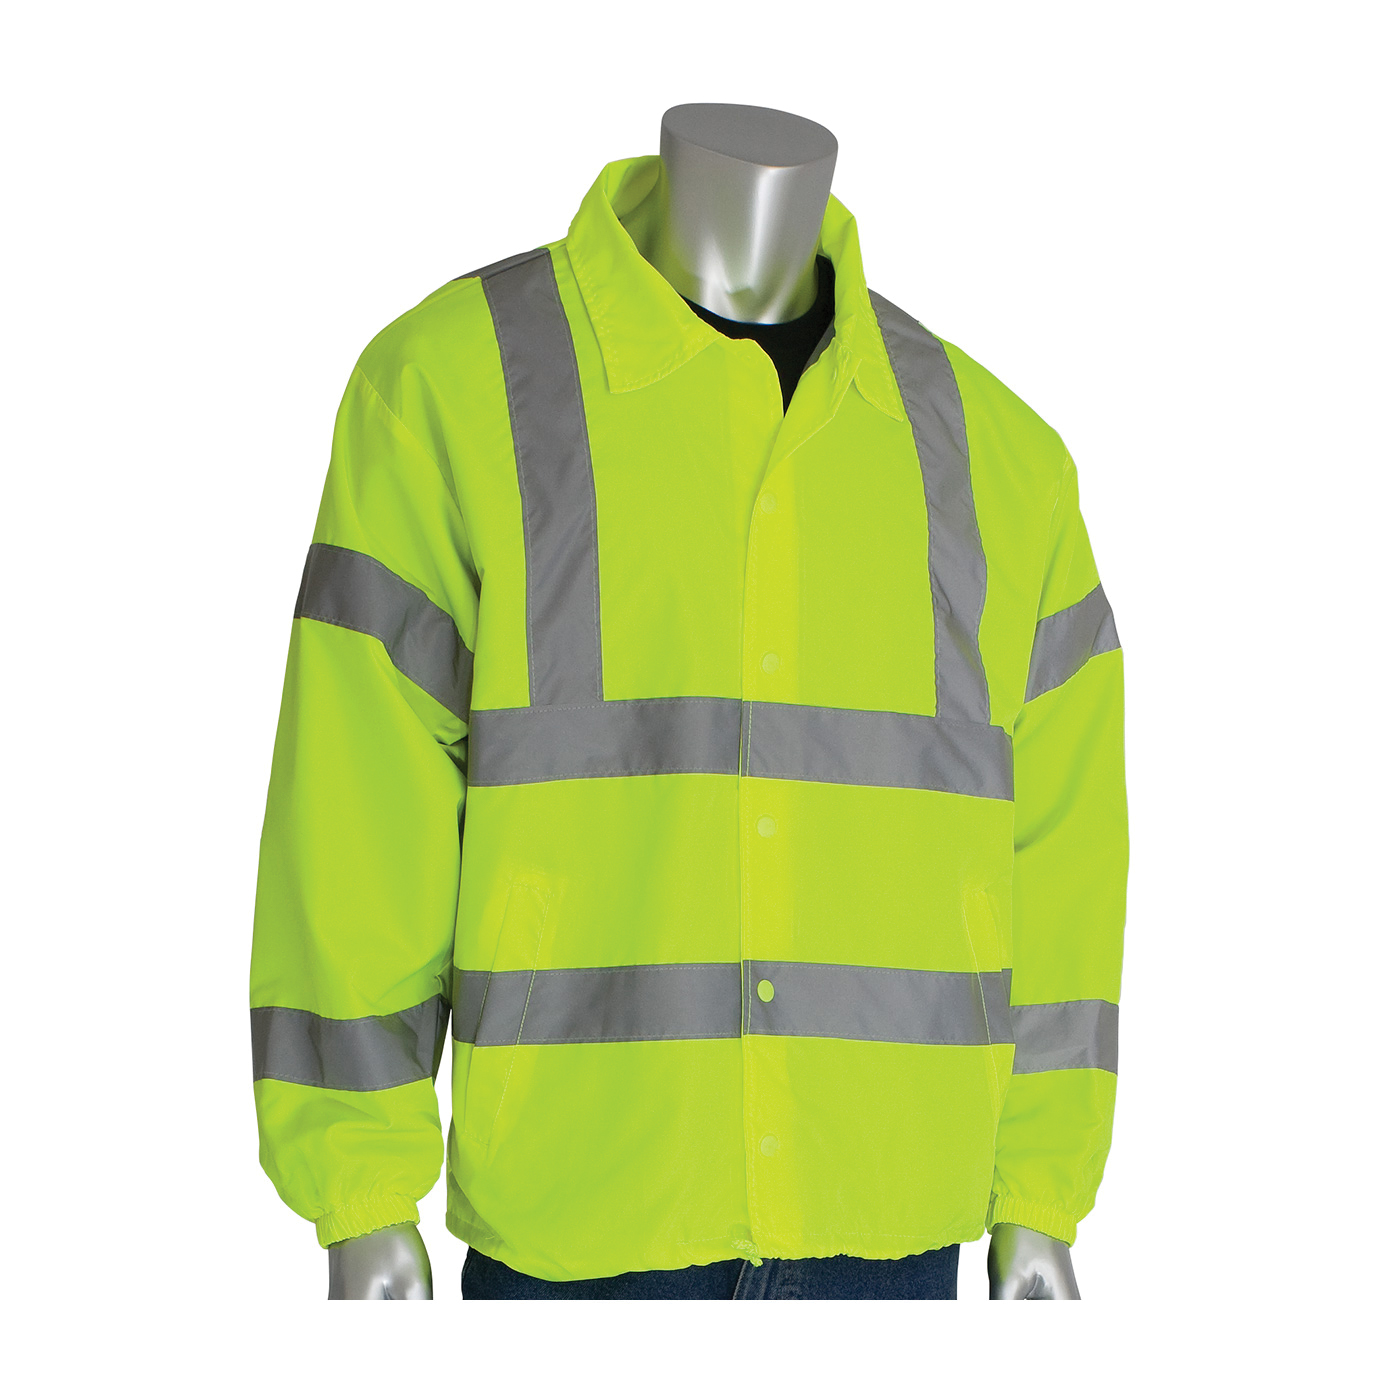 PIP® 333-WBLY-XL Classic Wind Breaker Jacket, Hi-Viz Lime Yellow, Polyester, 54.3 in Chest, Specifications Met: ANSI 107 Class 3 Type R